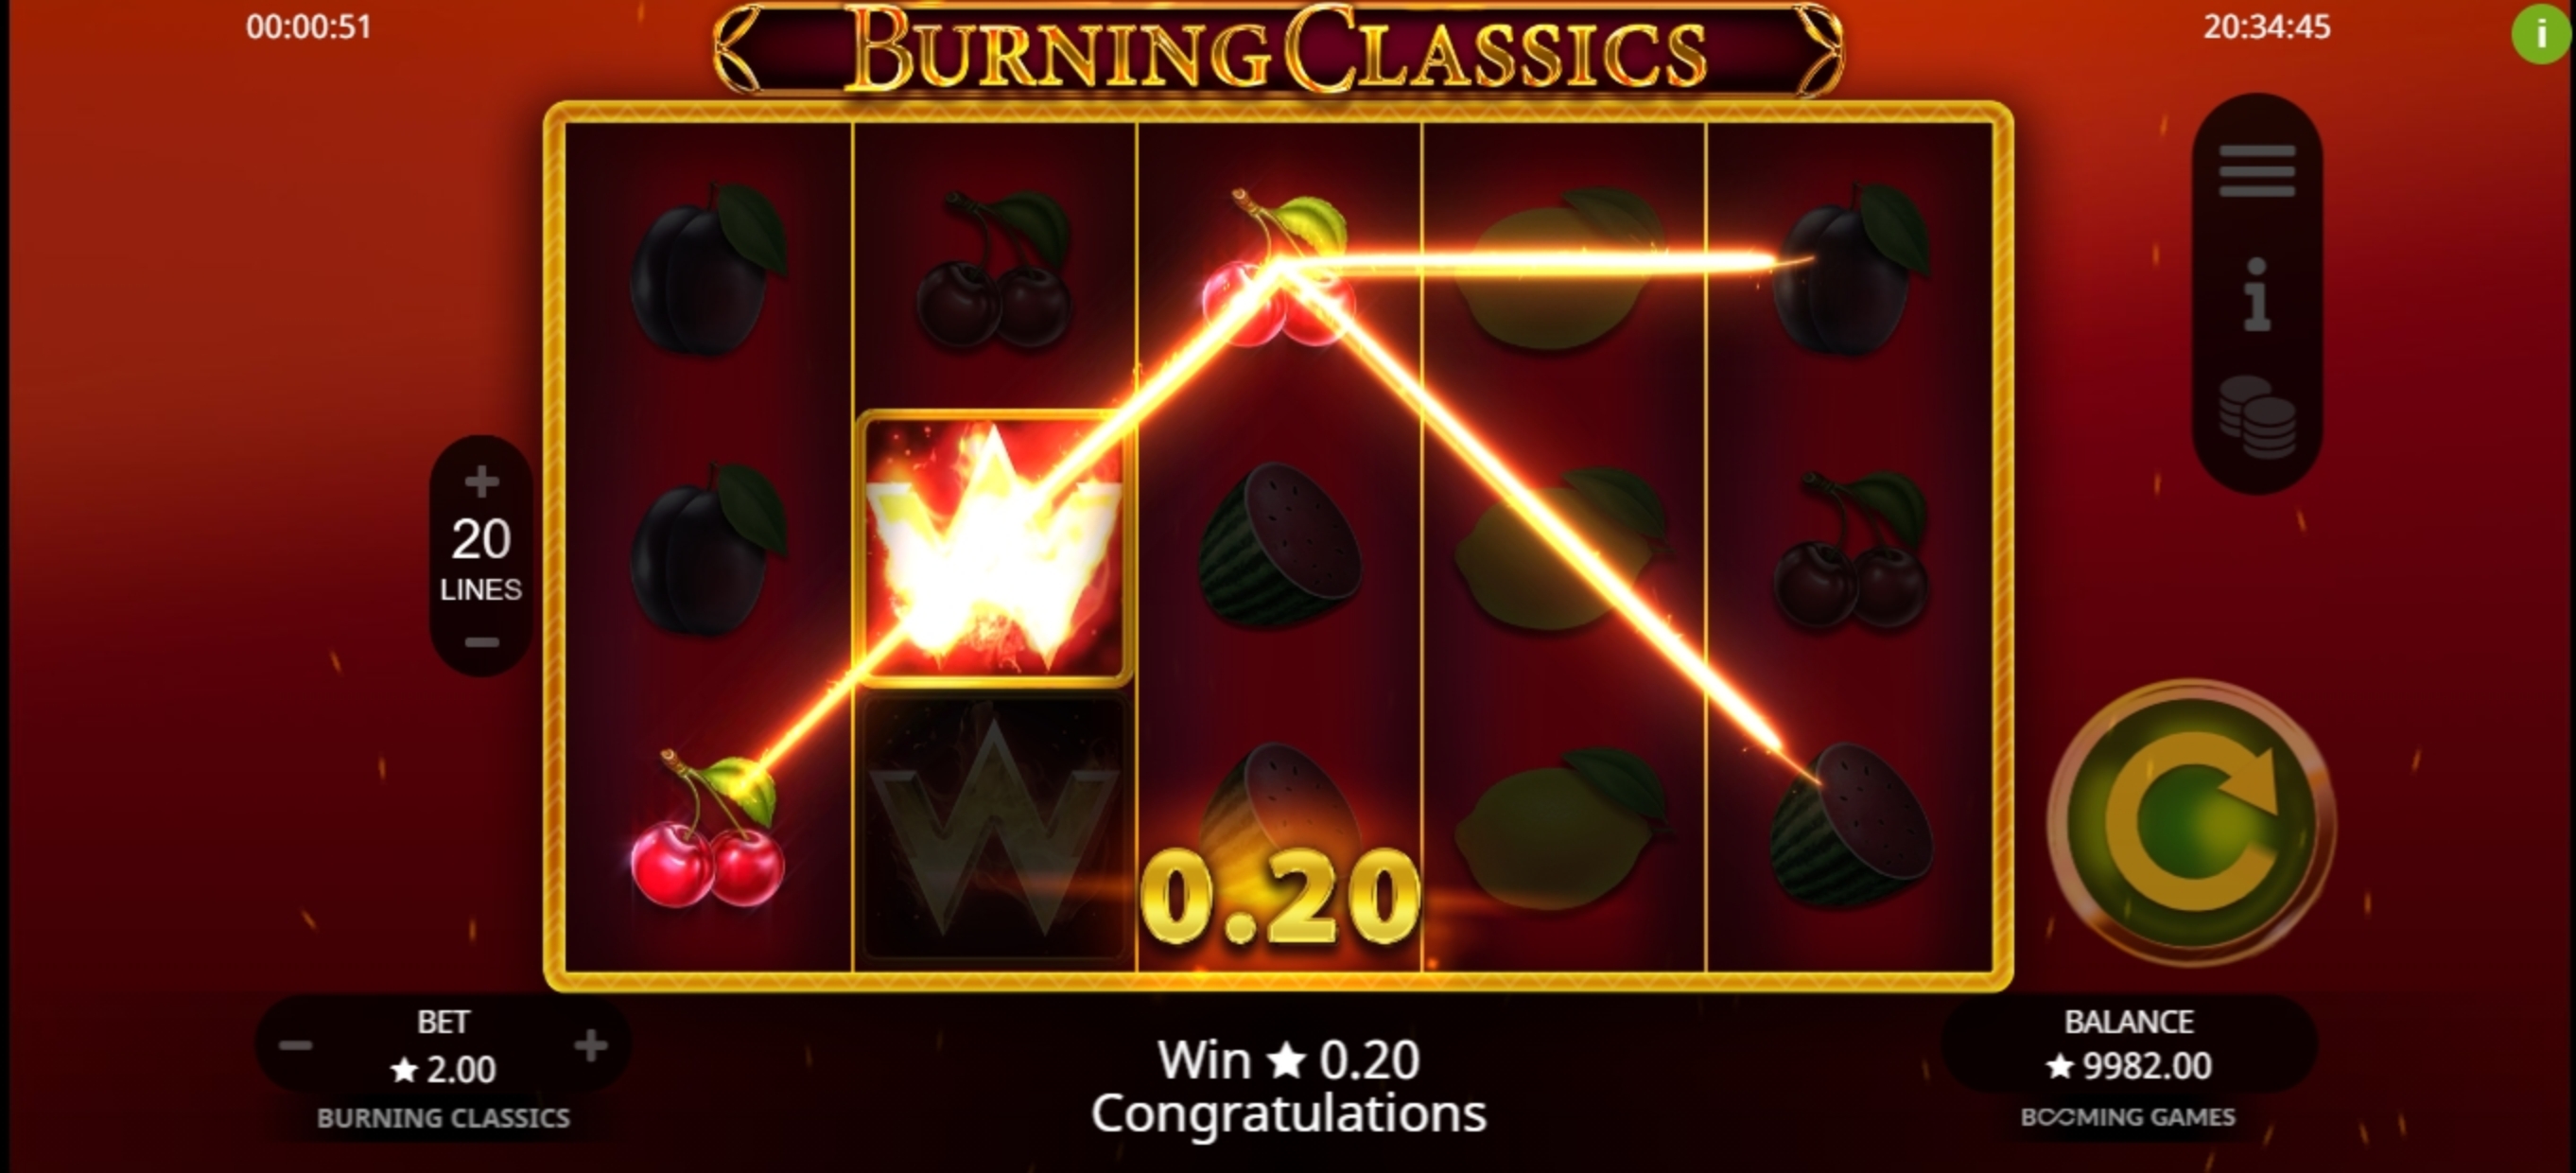 Win Money in Burning Classics Free Slot Game by Booming Games